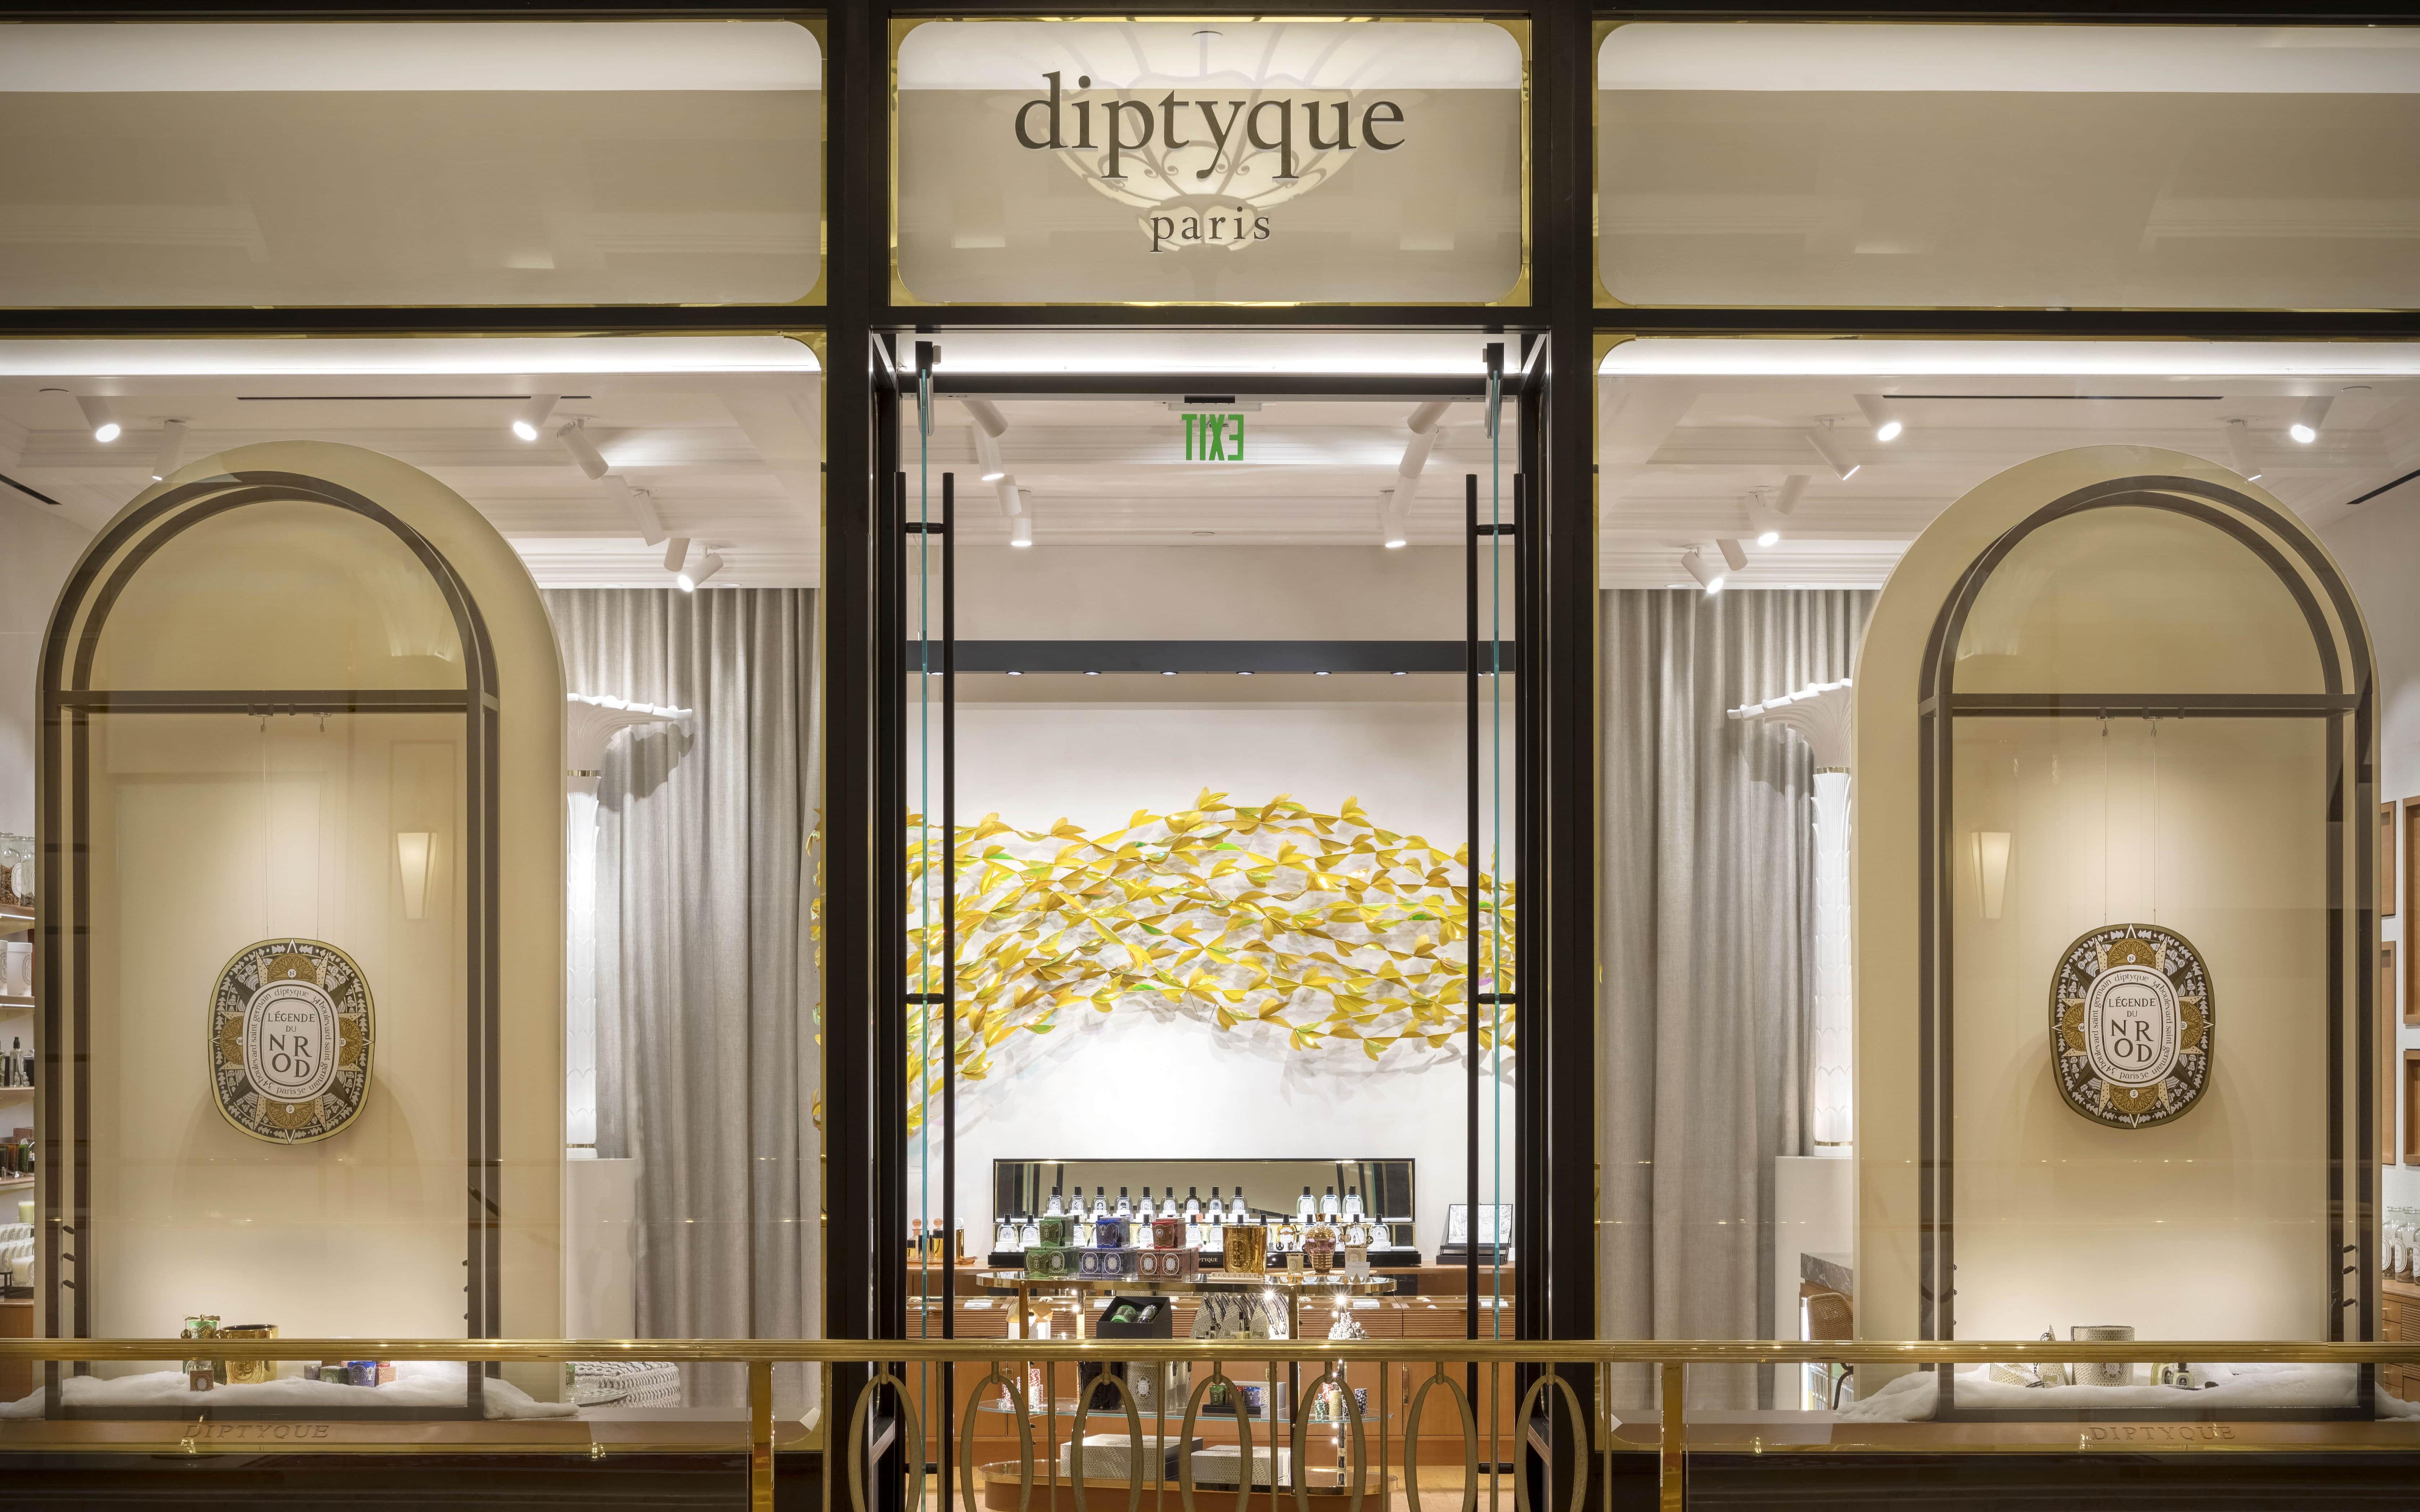 DIPTYQUE Las VegasThe Fabulous Personal Shopping Experience